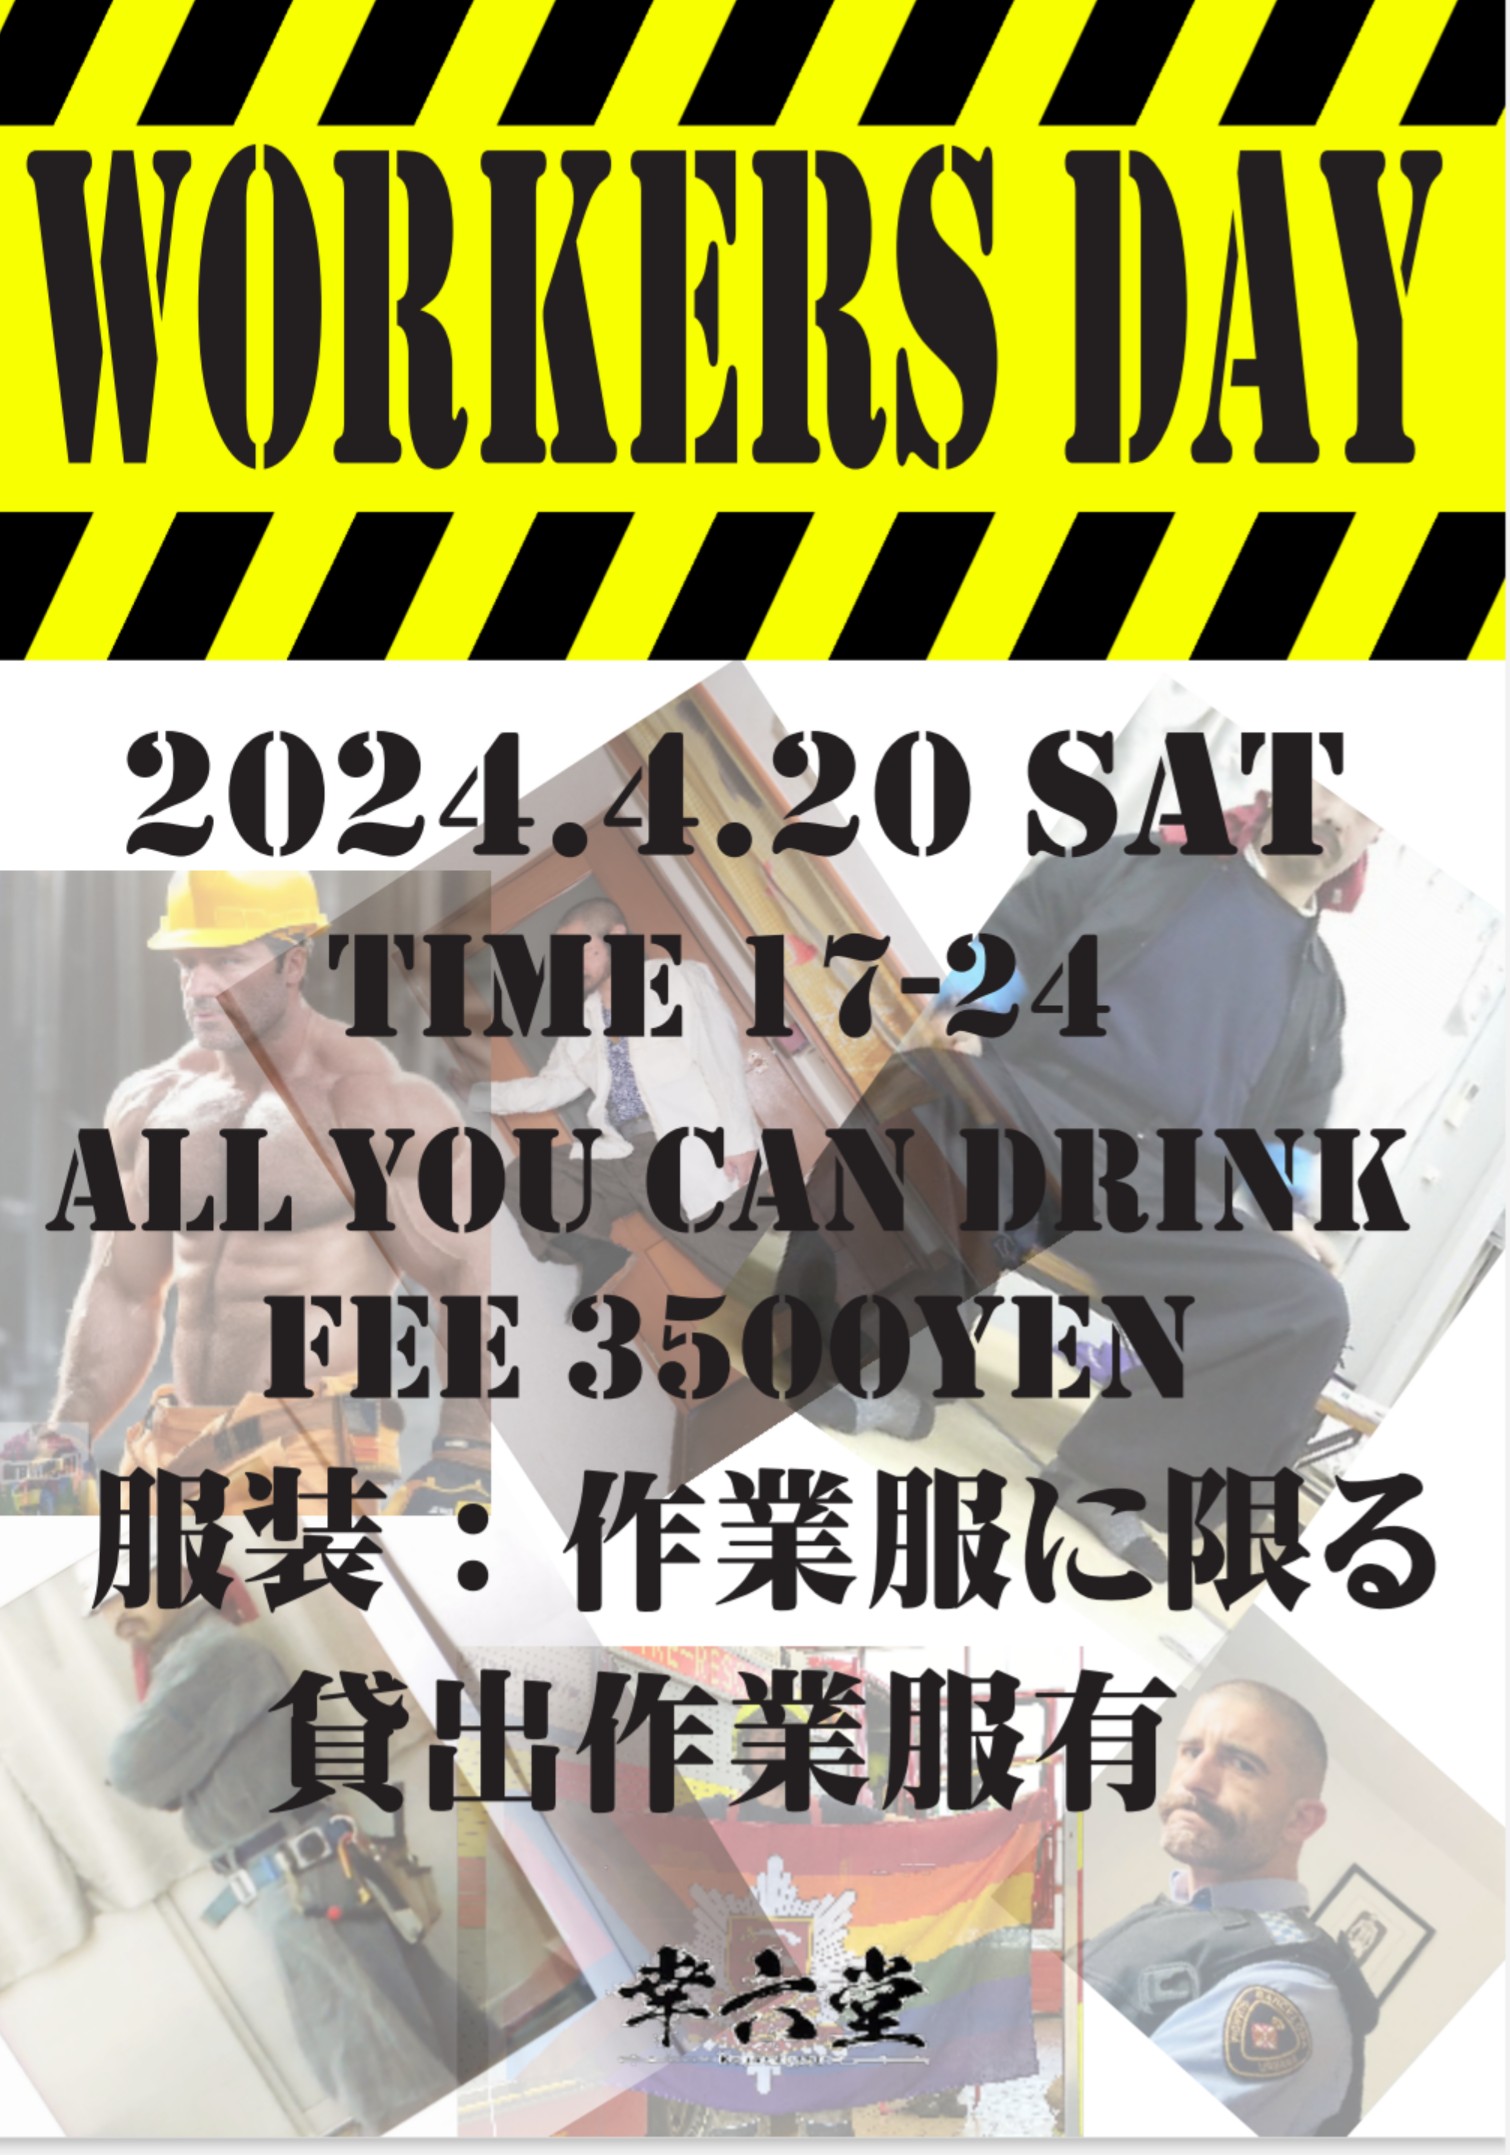 WORKERS DAY～作業着～